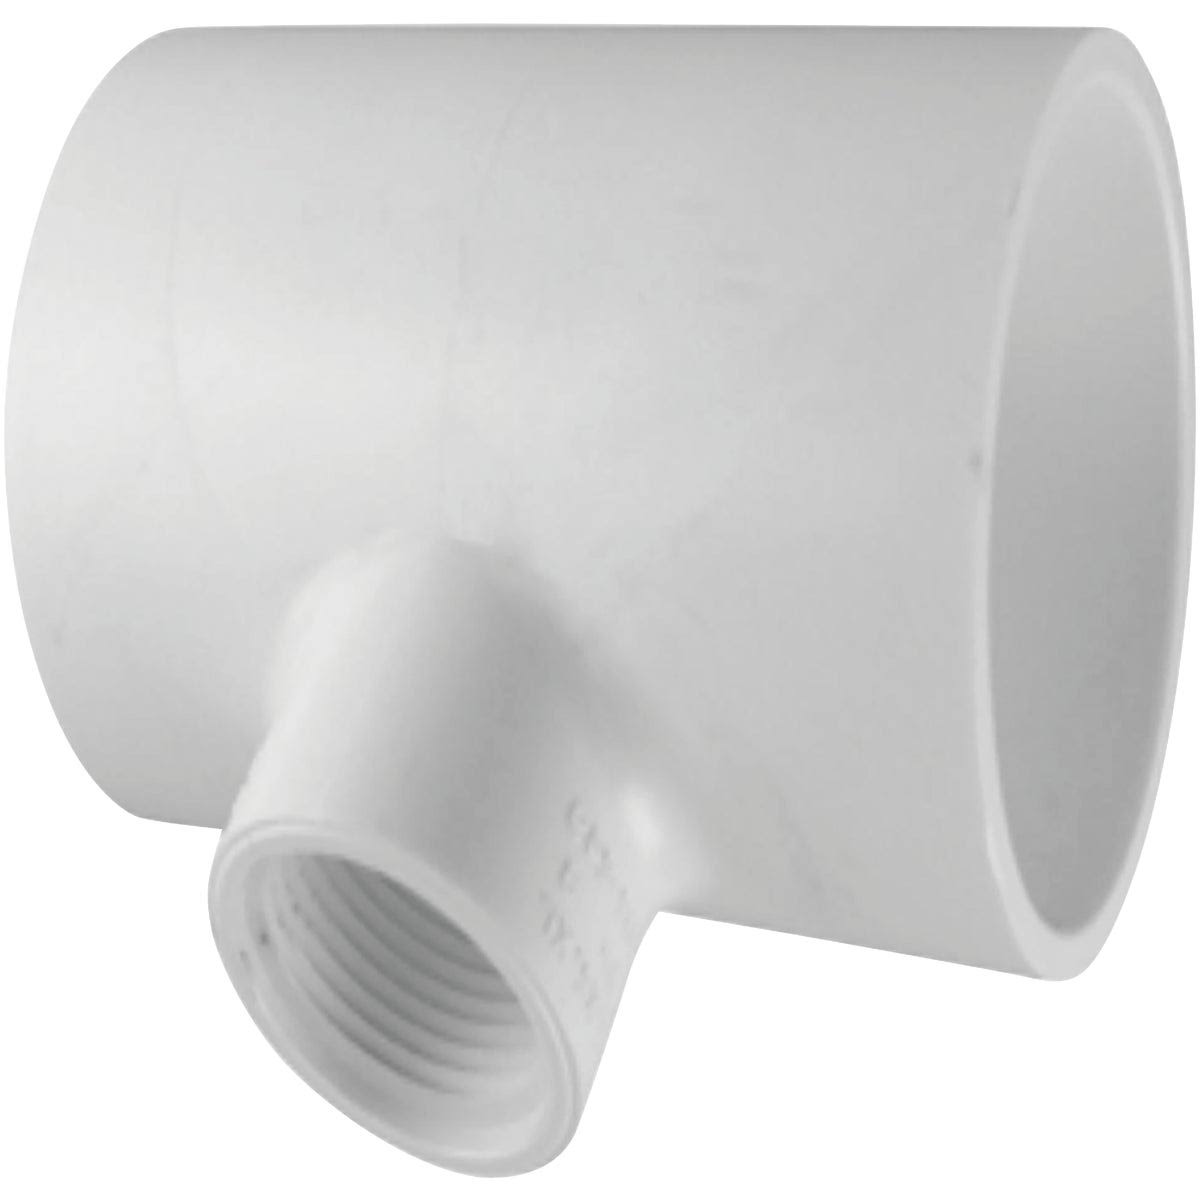 Schedule 40 PVC Pressure Pipe Fitting, Reducing Tee, White, 1 x 1 x 1/2-In.